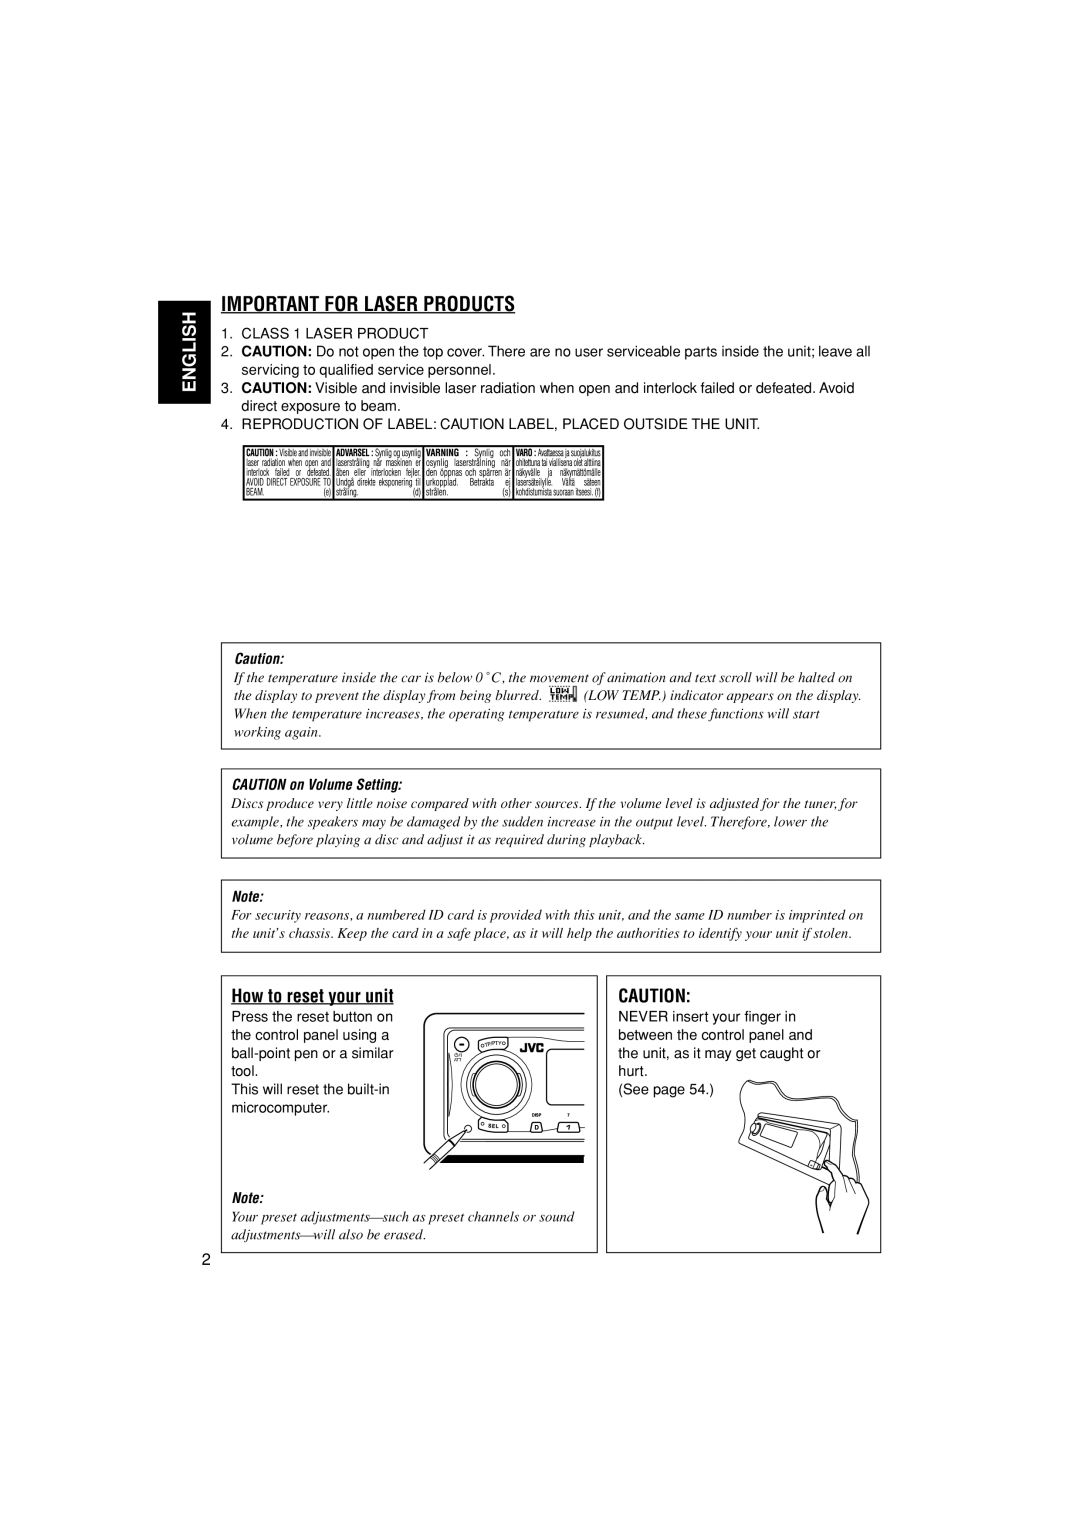 JVC KD-LH401 service manual Important For Laser Products, English, How to reset your unit, CAUTION on Volume Setting 